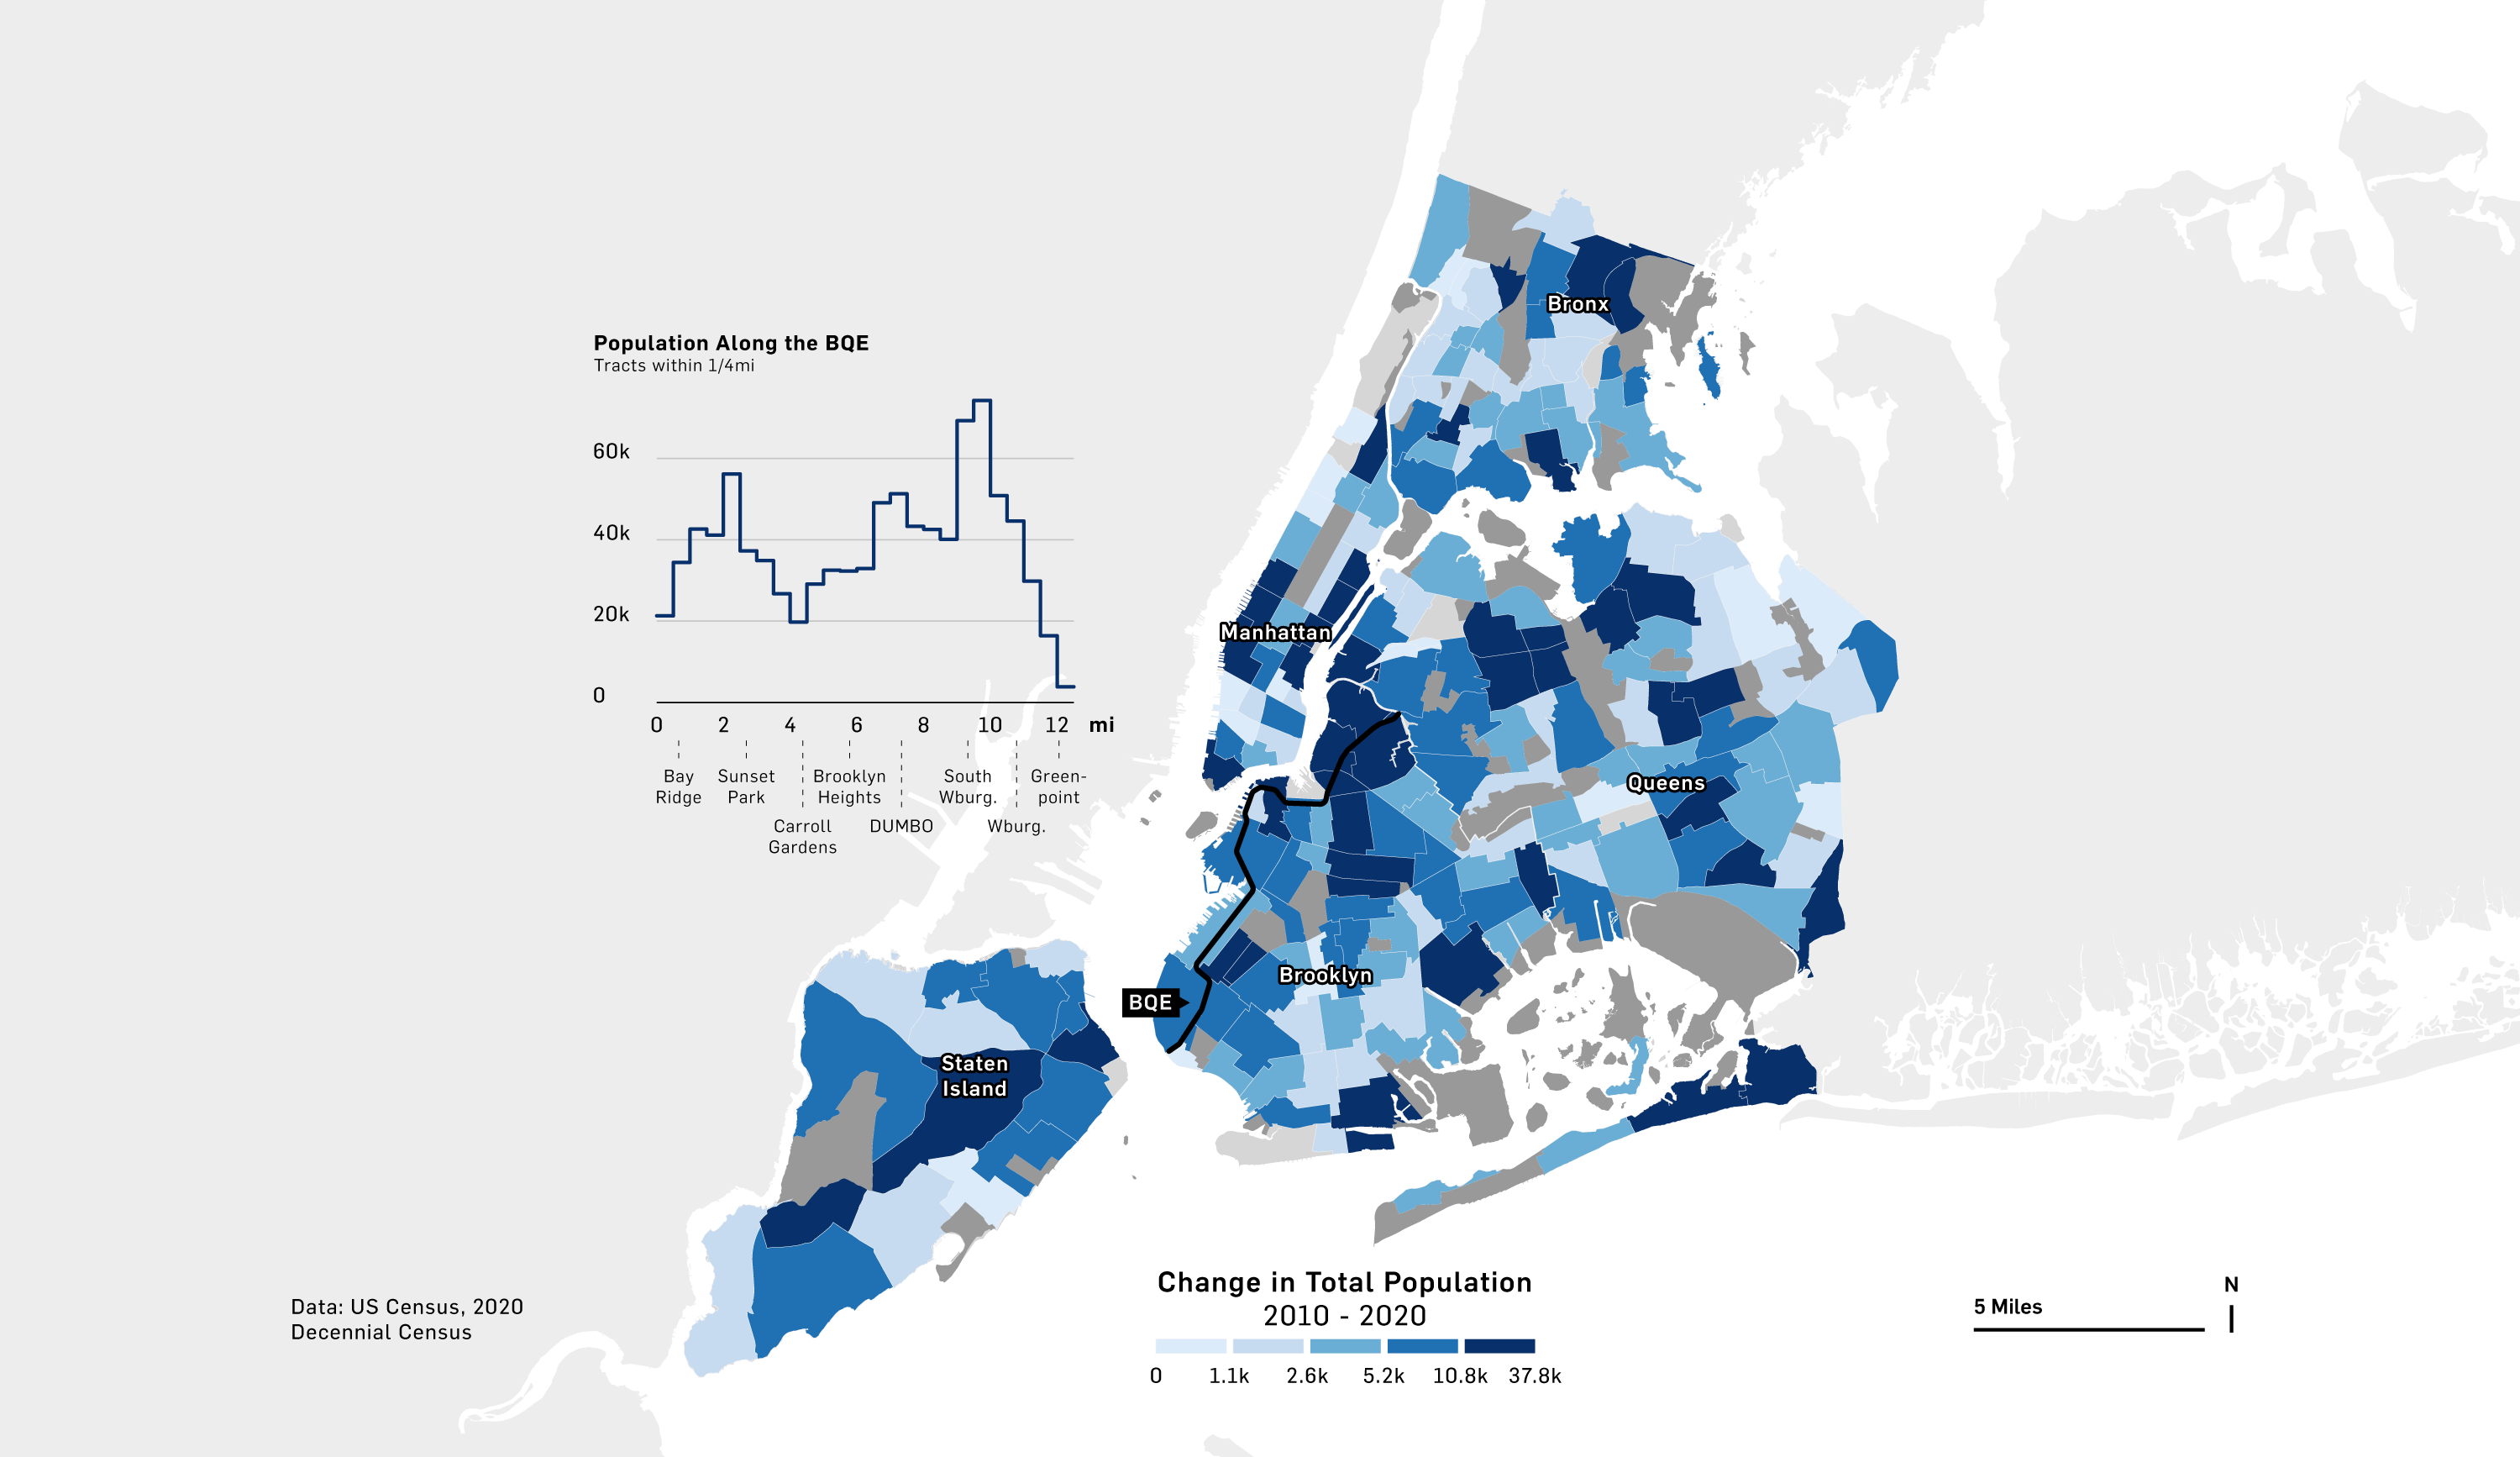 Total population along the BQE in Brooklyn